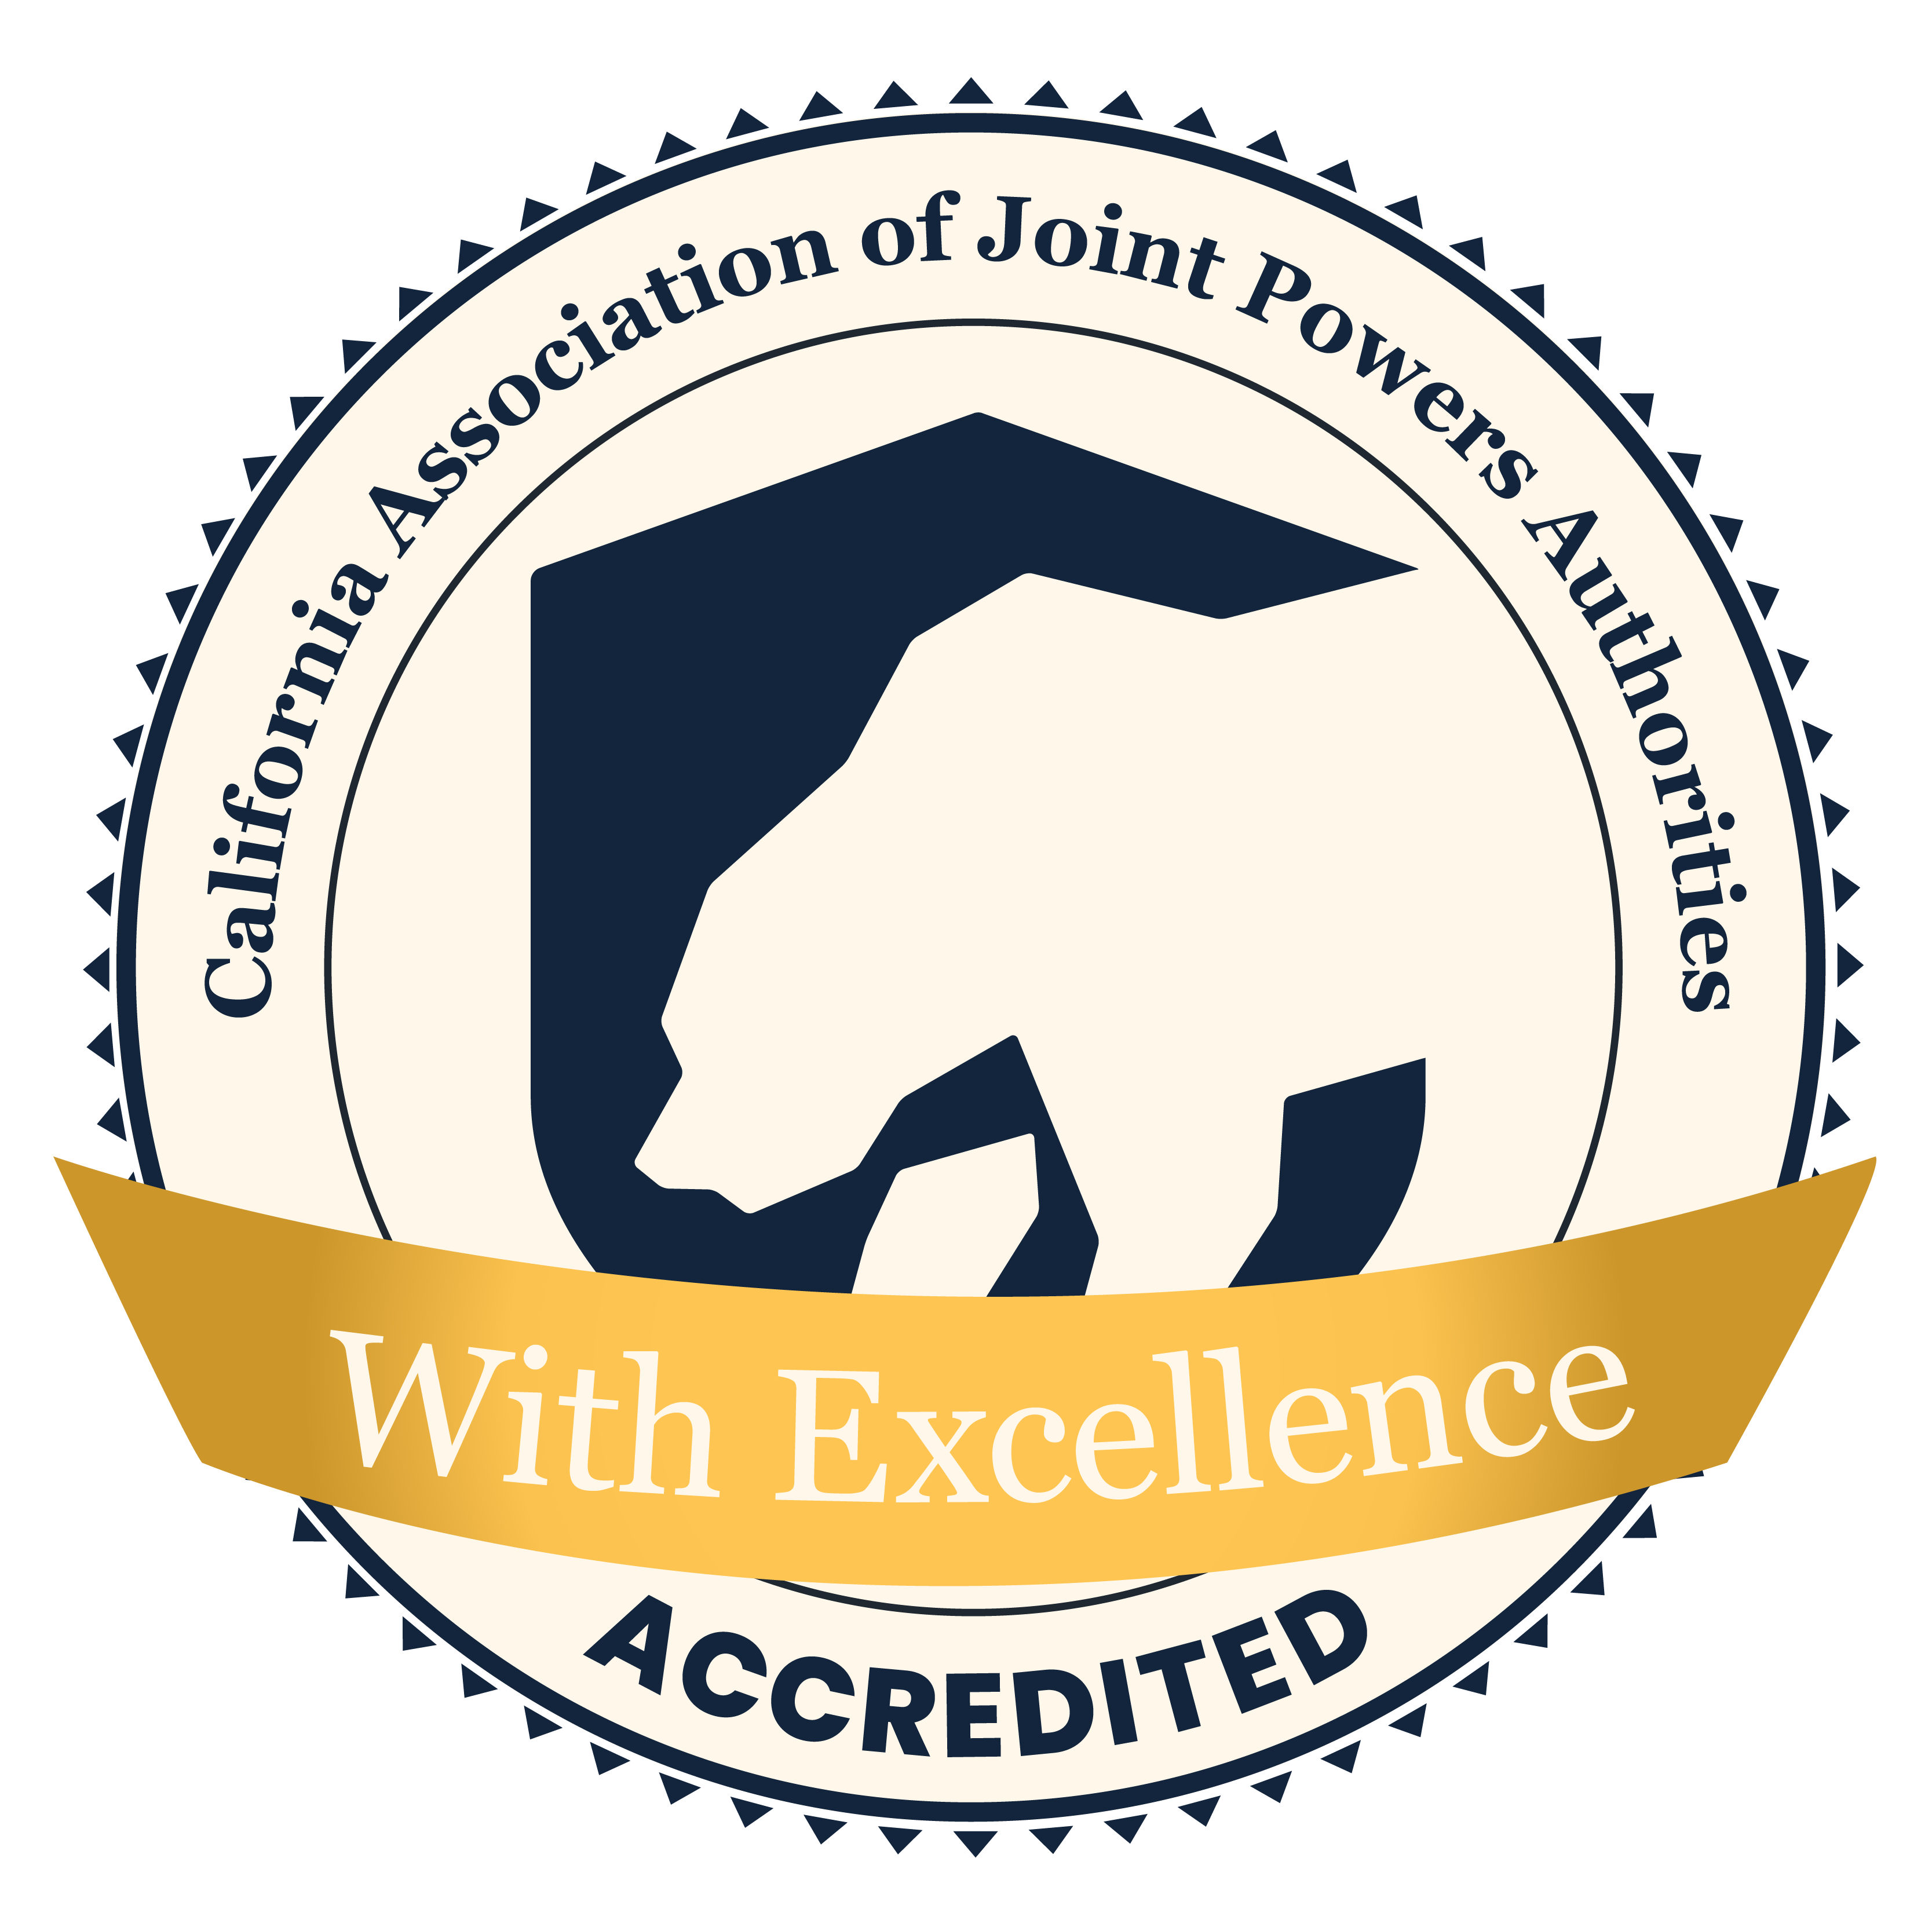 California Association of Joint Powers Authorities Accredited logo - With Excellence designation